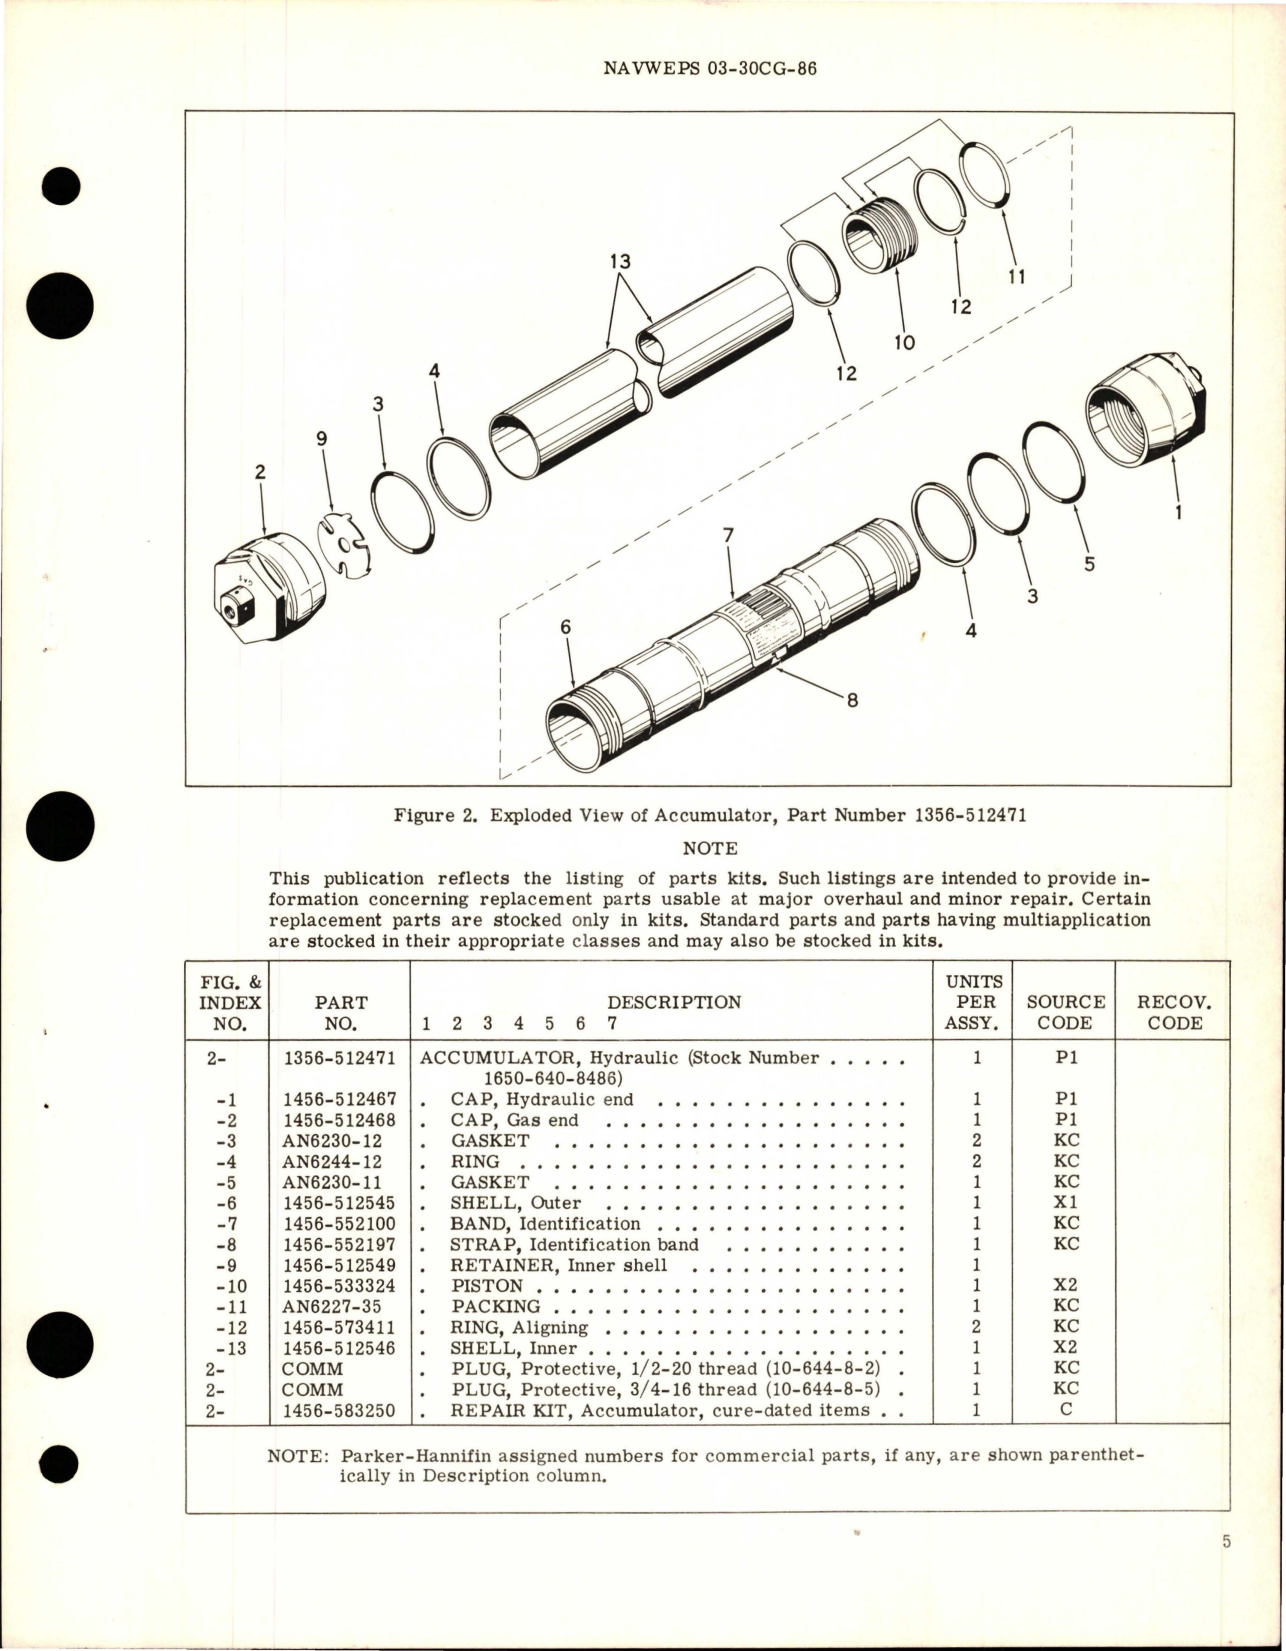 Sample page 5 from AirCorps Library document: Overhaul Instructions with Parts Breakdown for Hydraulic Accumulator - Part 1356-512471